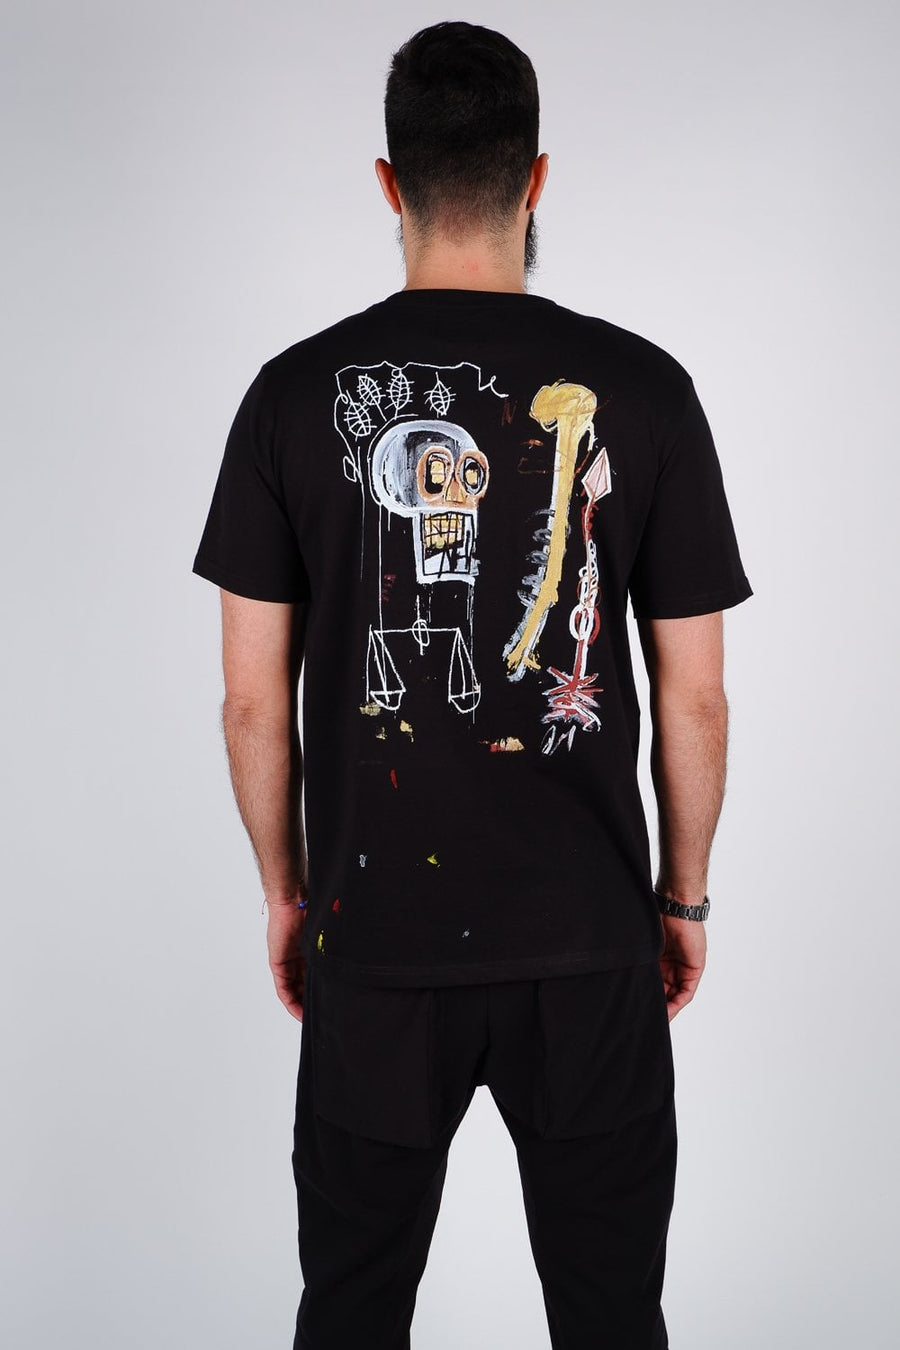 Buy the ABE Skull T-Shirt in Black at Intro. Spend £50 for free UK delivery. Official stockists. We ship worldwide.